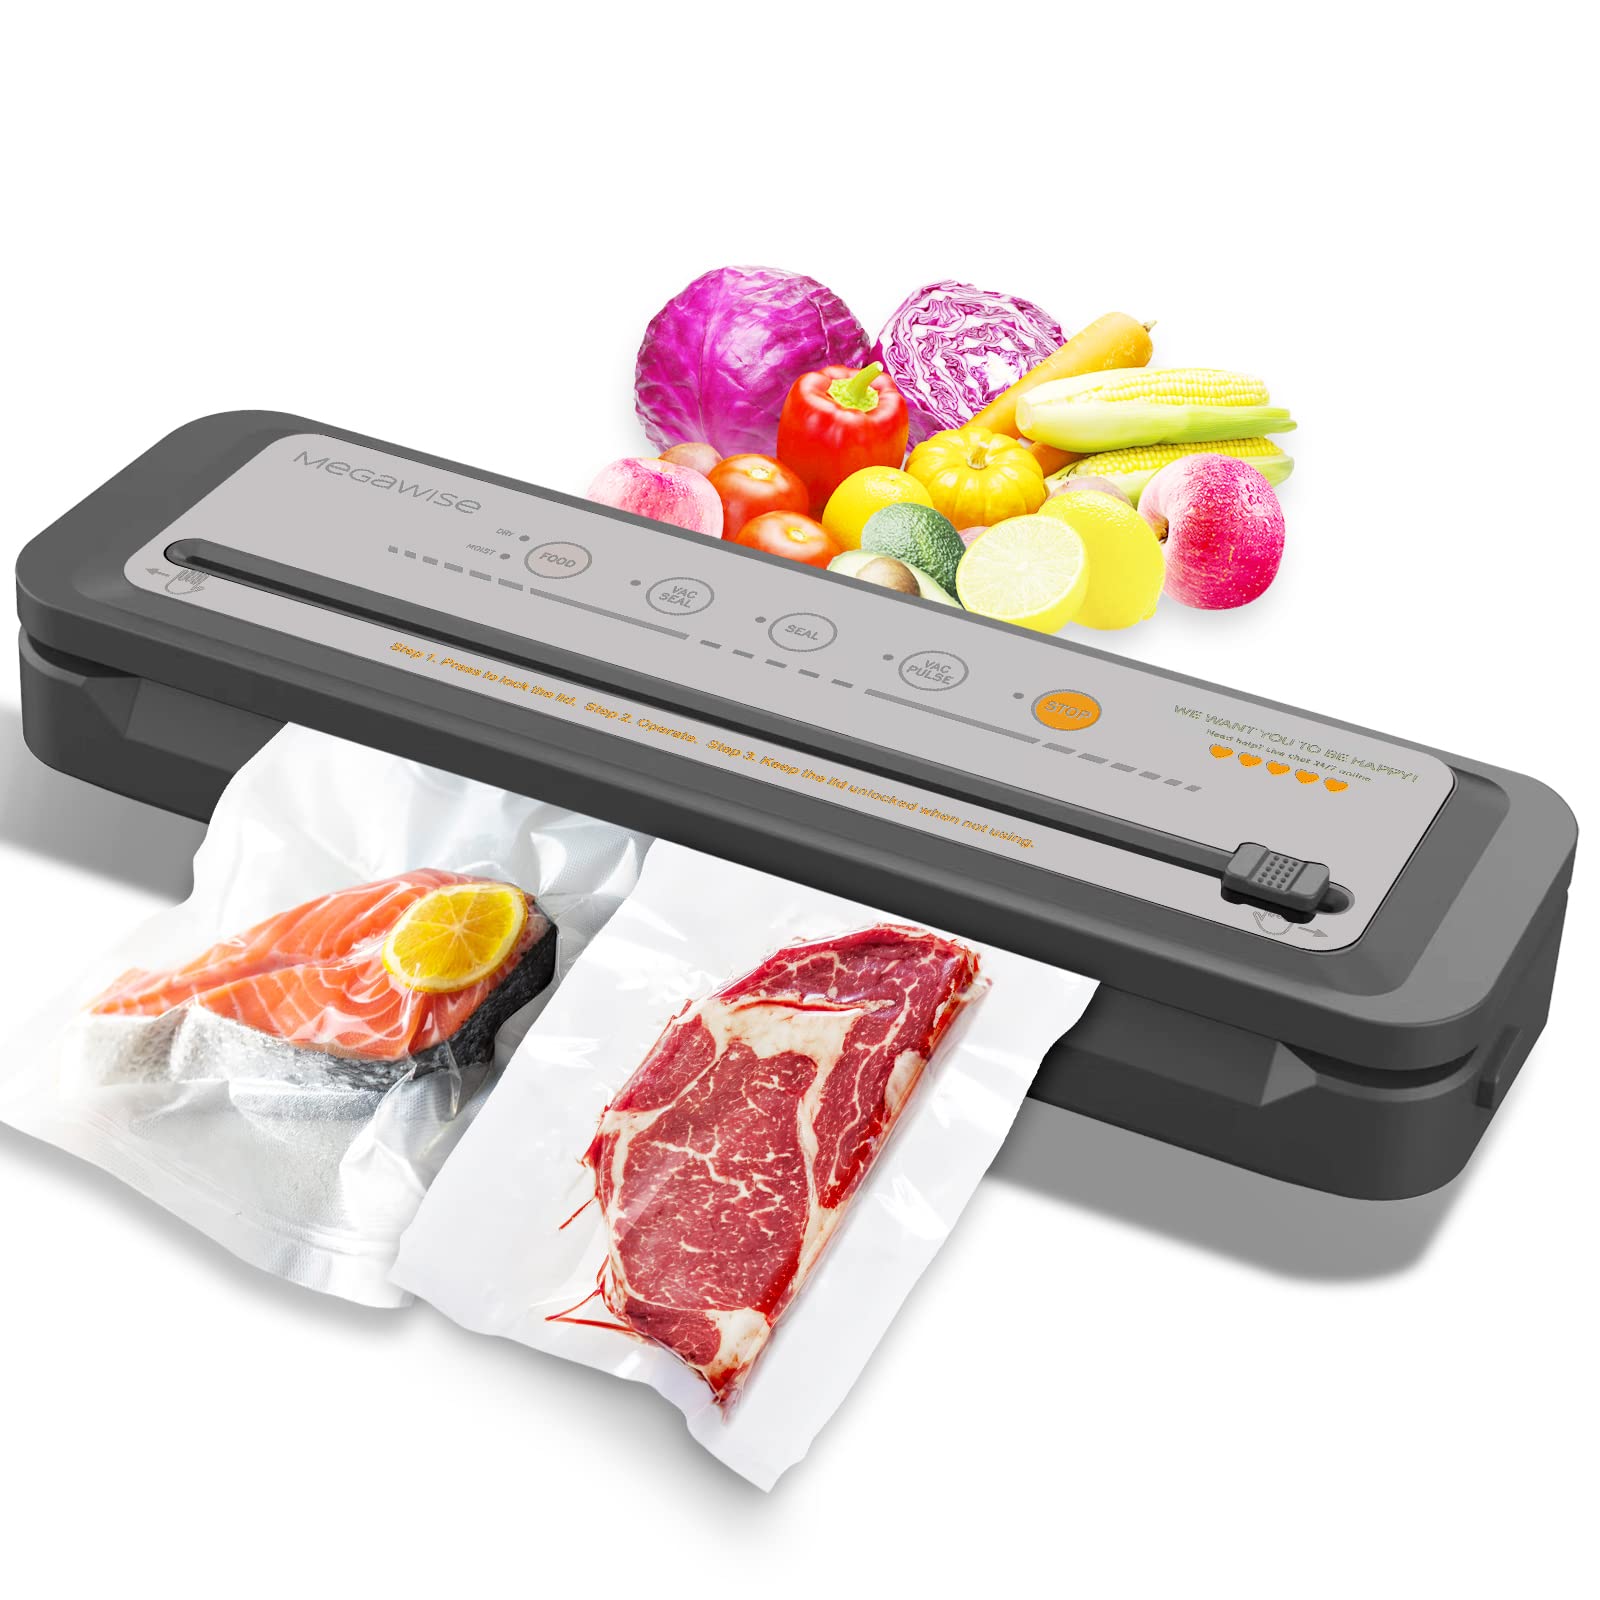 MegaWise Powerful and Compact Vacuum Sealer Machine (Silver Grey)